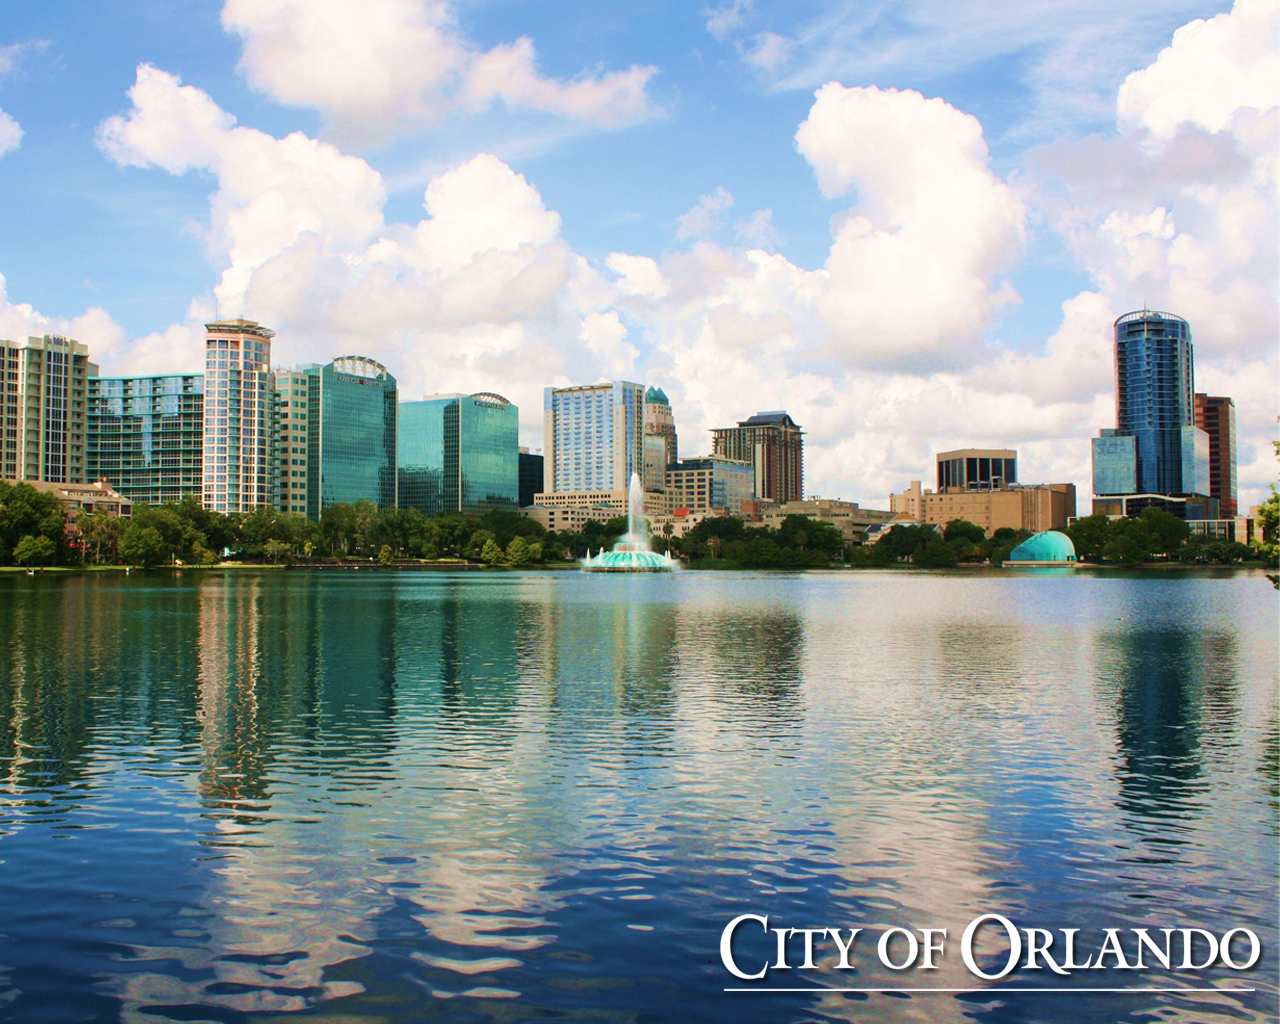 City of Orlando HD Wallpaper HD Wallpapers HD Backgrounds